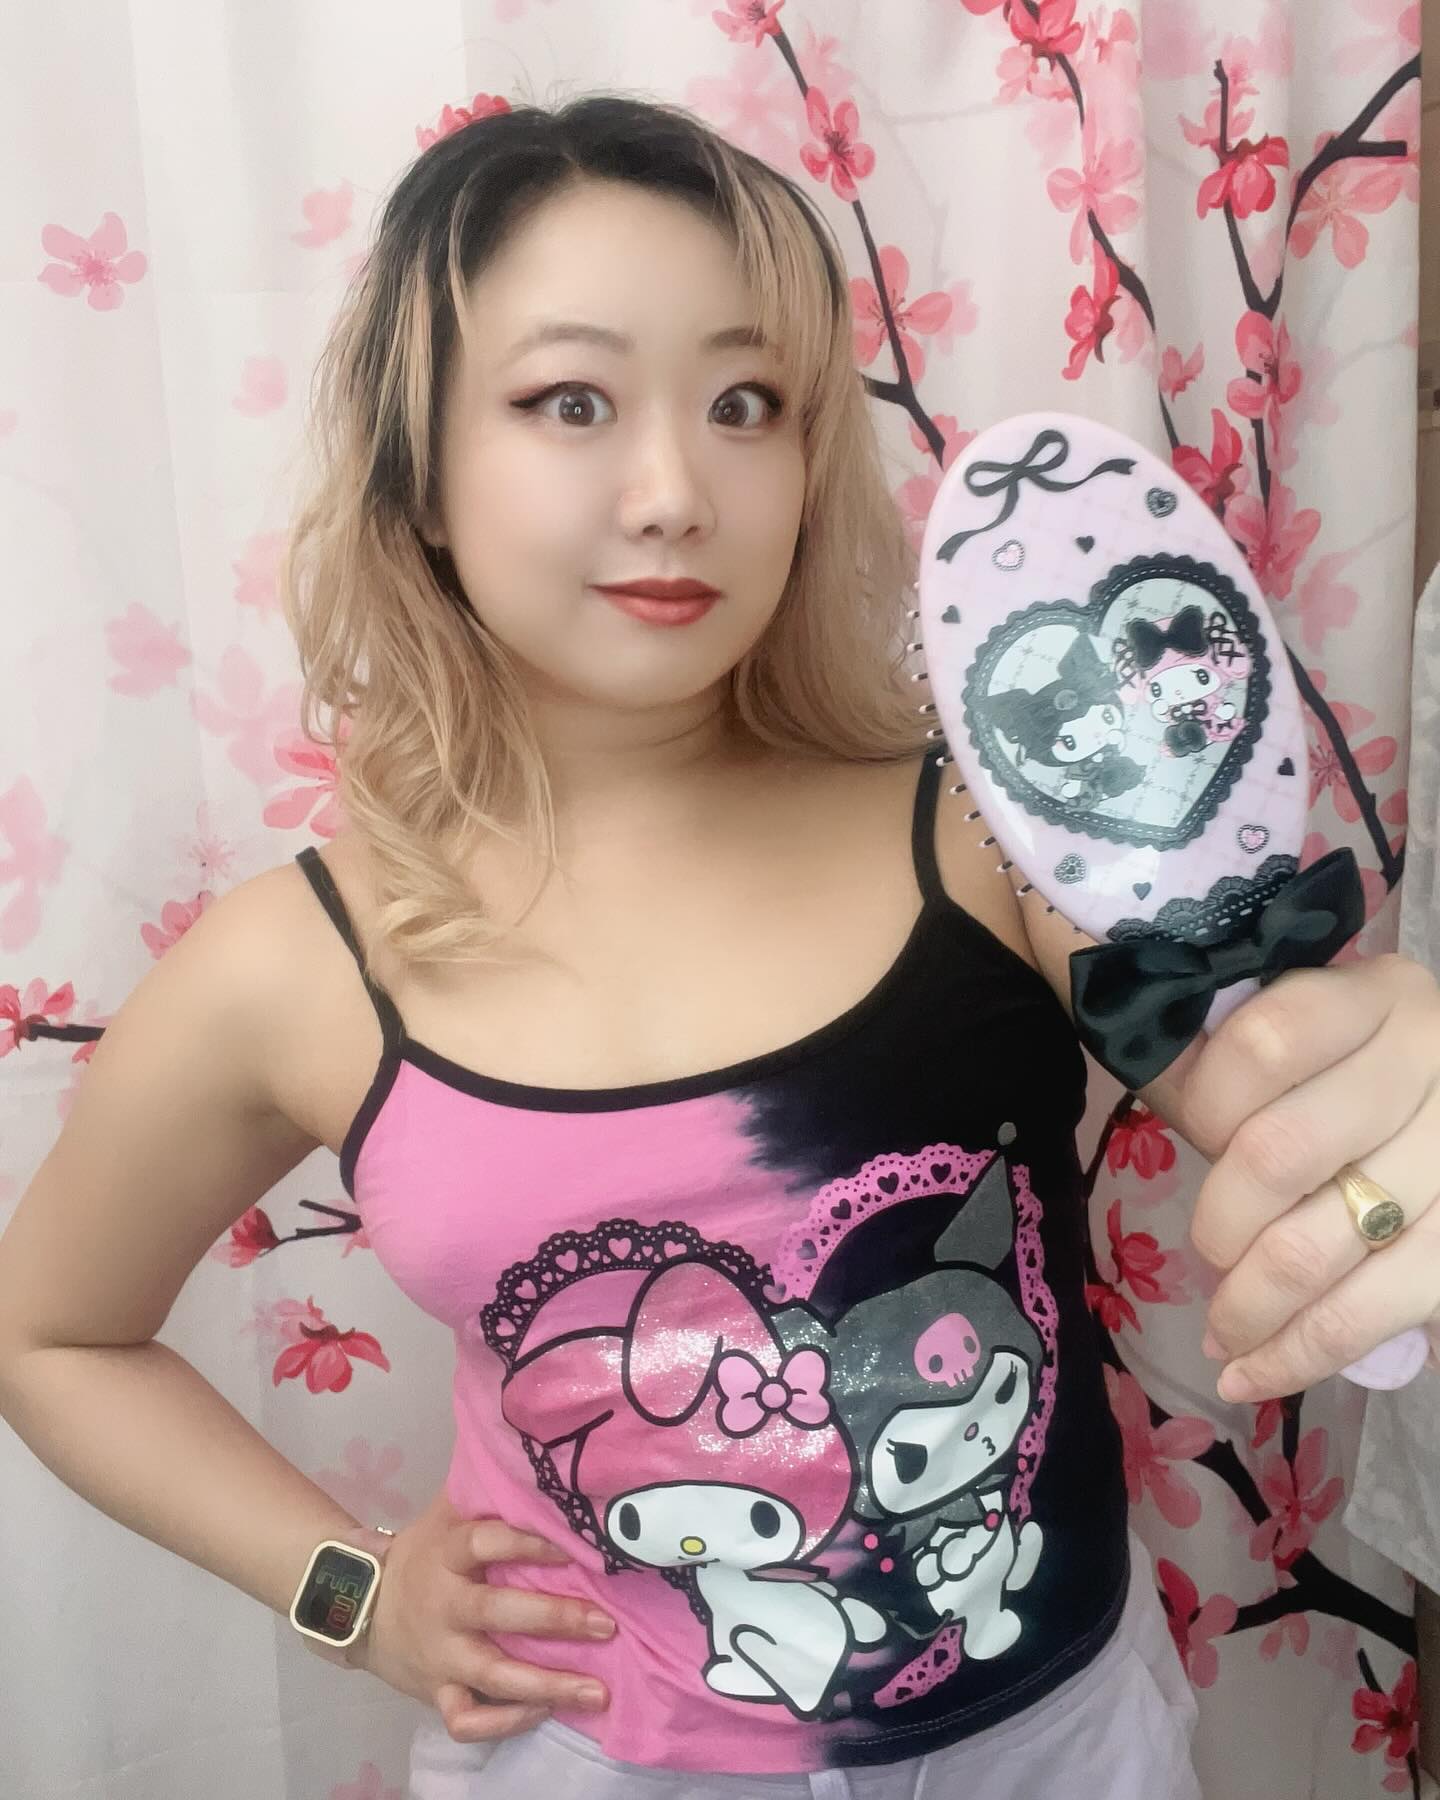 Thank you @hottopic for this adorable My Melody X Kuromi cami and My Melody x Kuromi Lolita-inspired hairbrush. 🖤🩷 sooo cute!!! 😍
➡️ Swipe to see more photos ➡️
__
#sponsoredbyHT #HTFxMarchMustHaves #hottopic #htfanatic #sanrio #mymelody #kuromi #mymelo #mymelodyxkuromi #kuromixmymelody #kawaii #lolitainspired